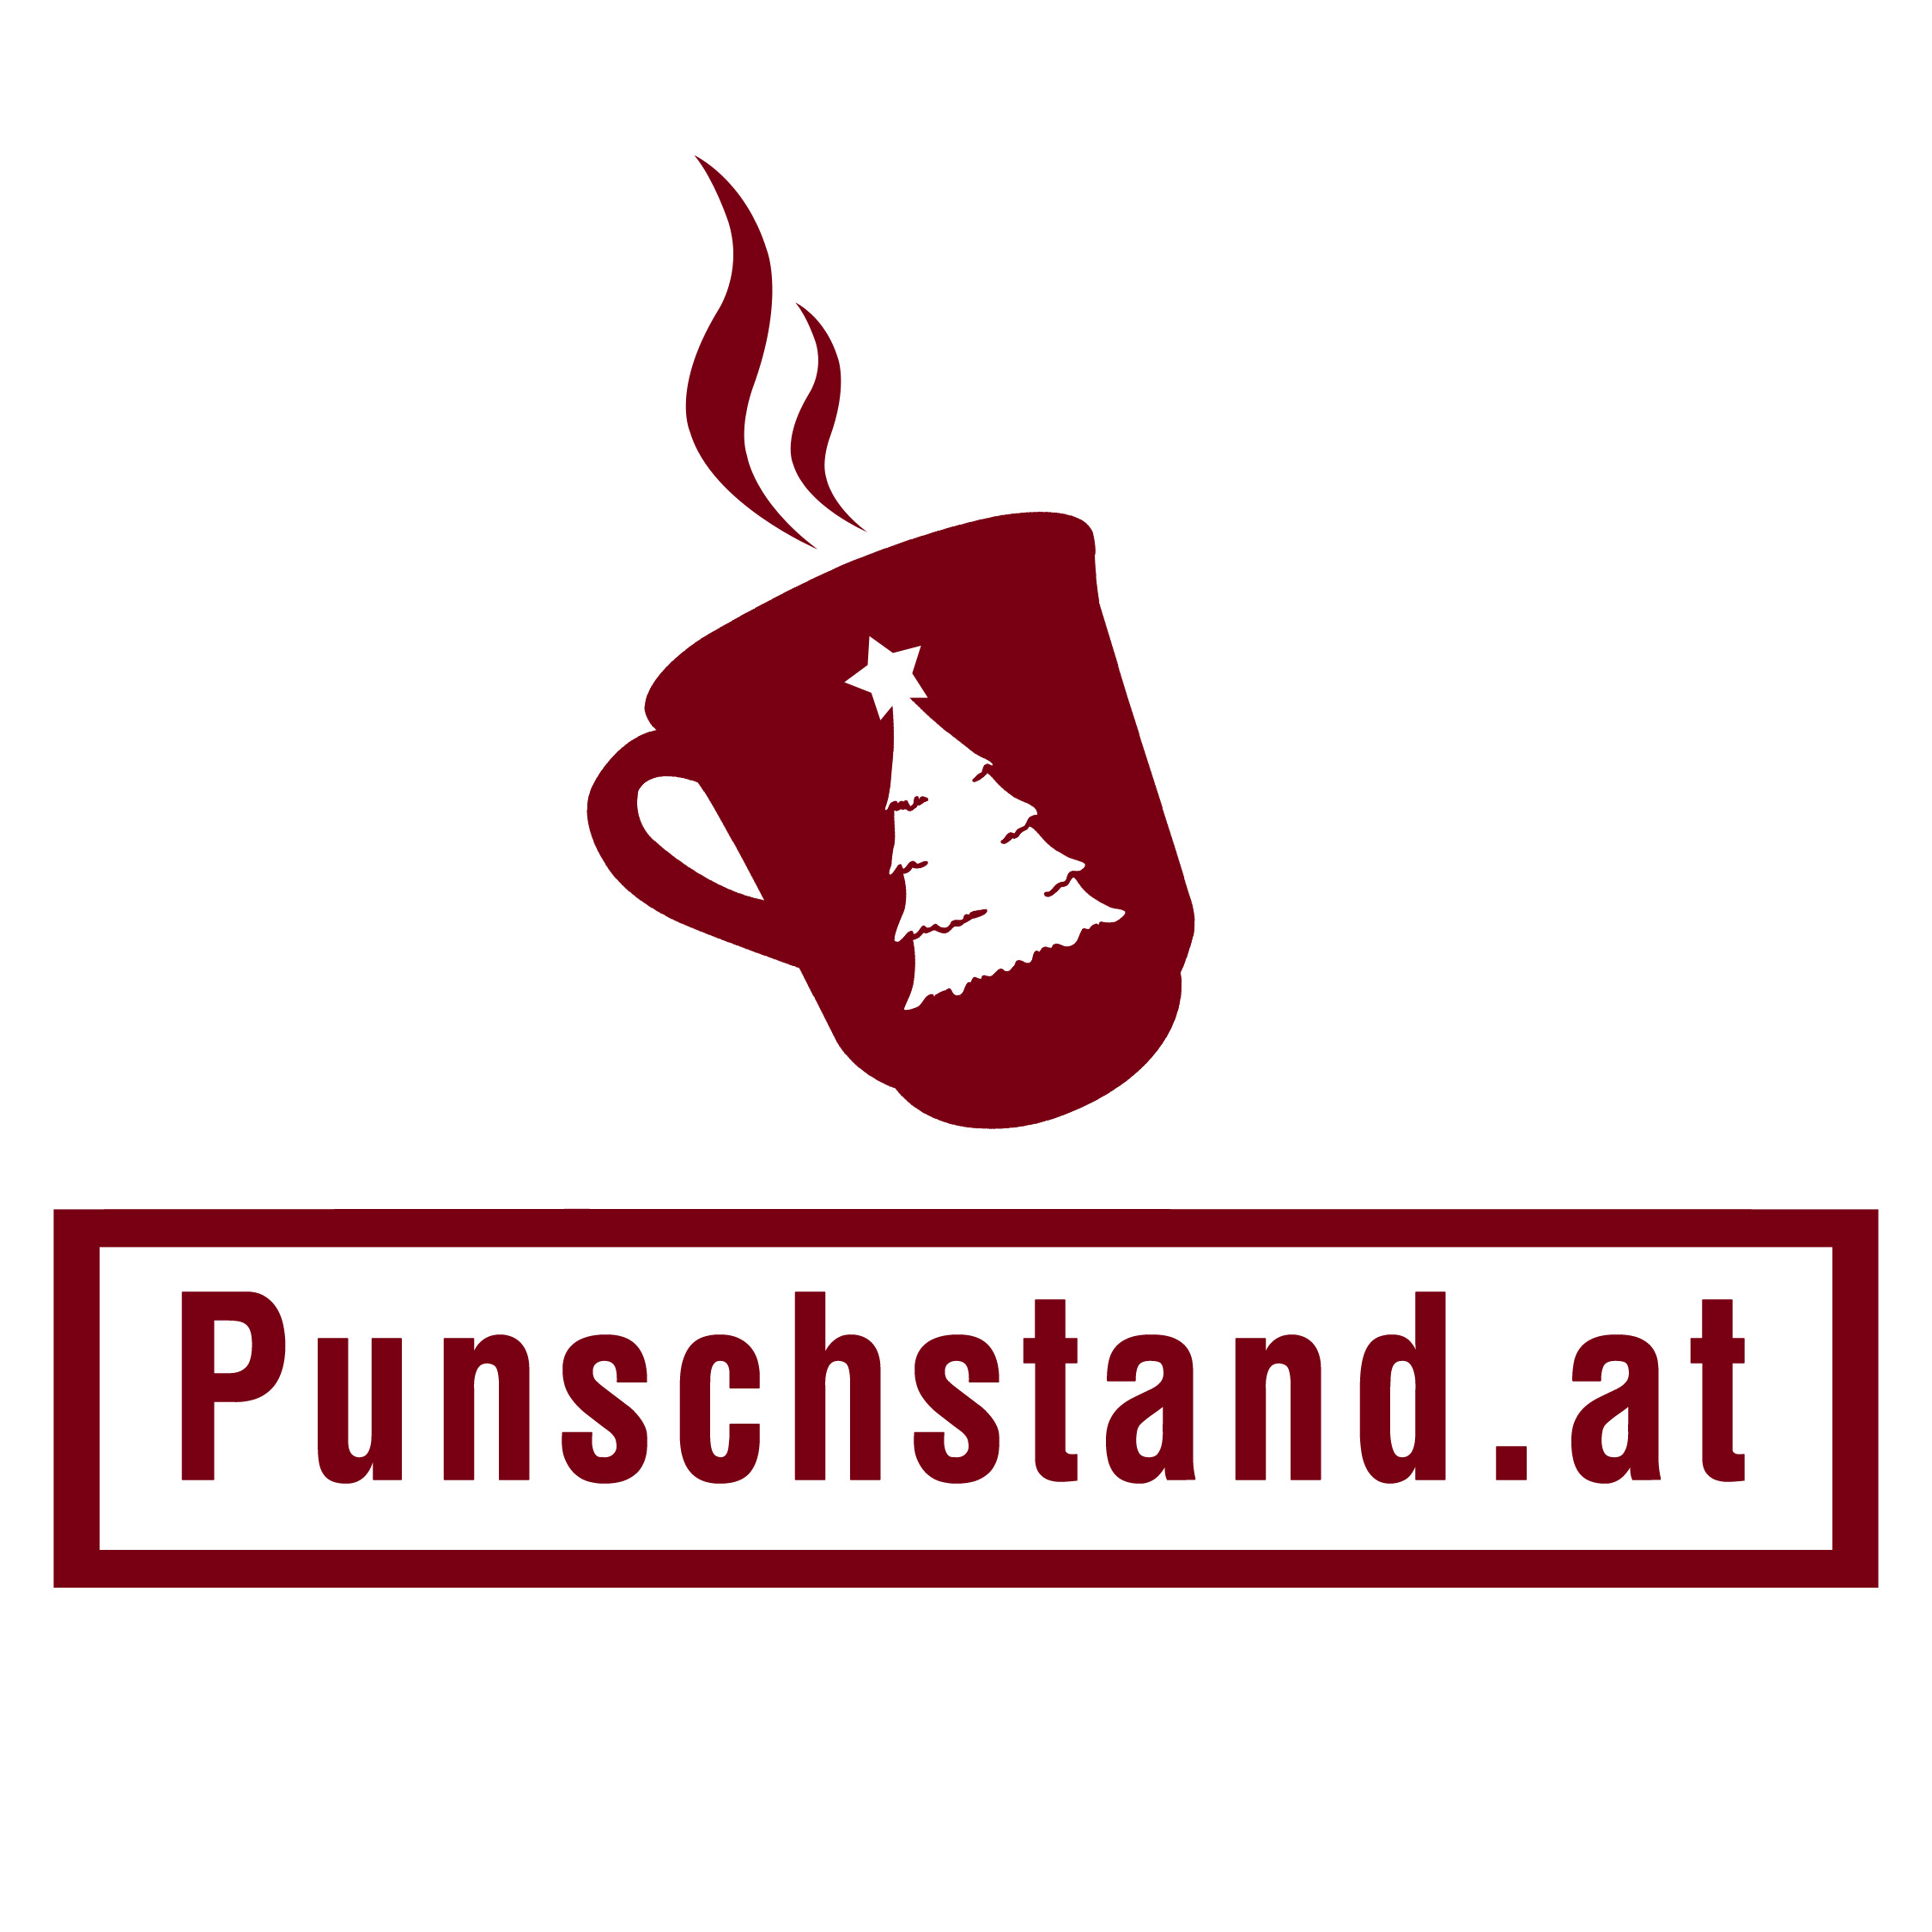 (c) Punschstand.at